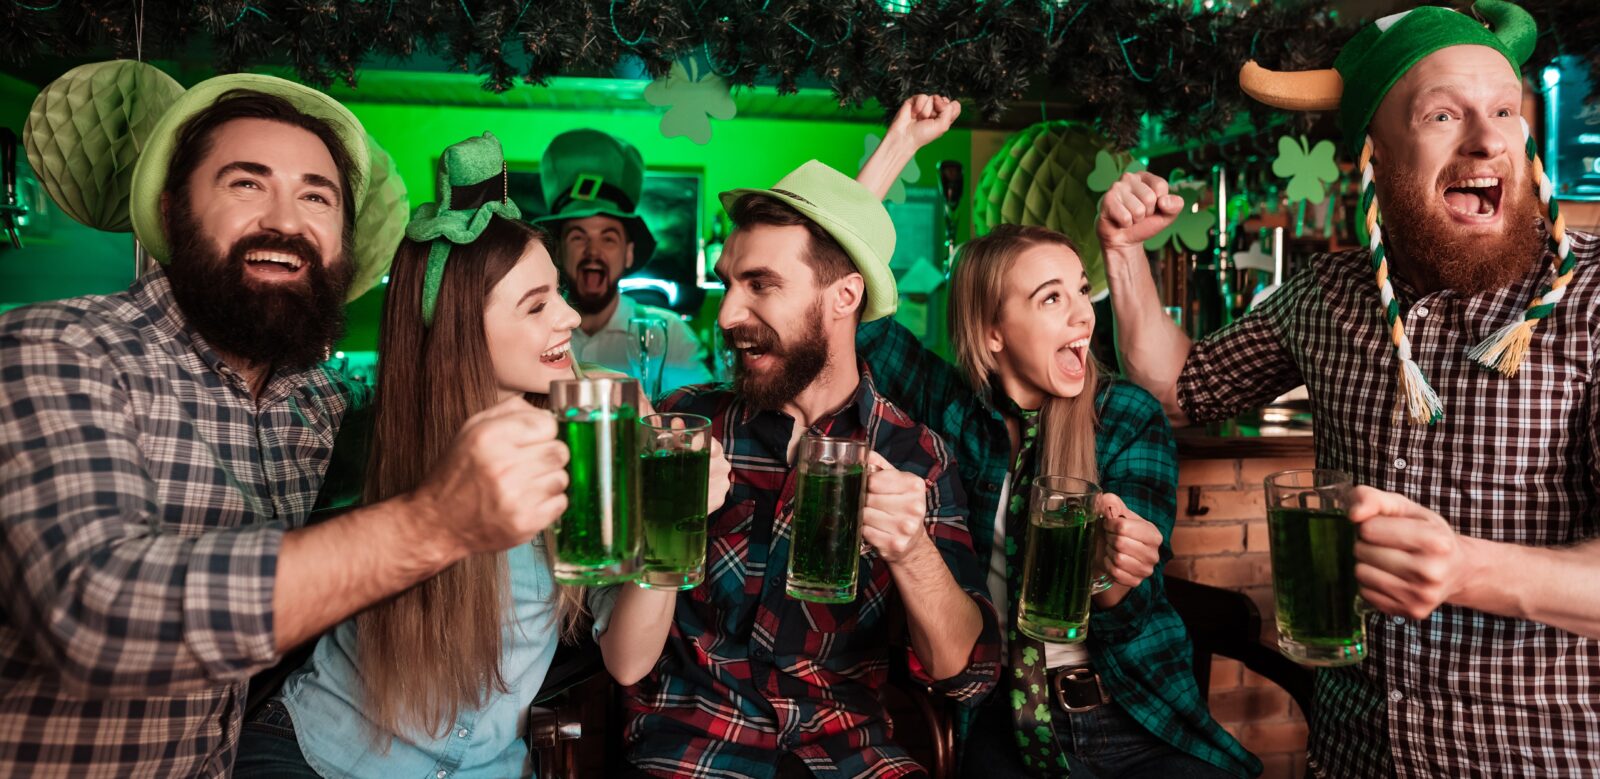 Do The Almost St. Patty’s Day Crawl in Bakersfield!